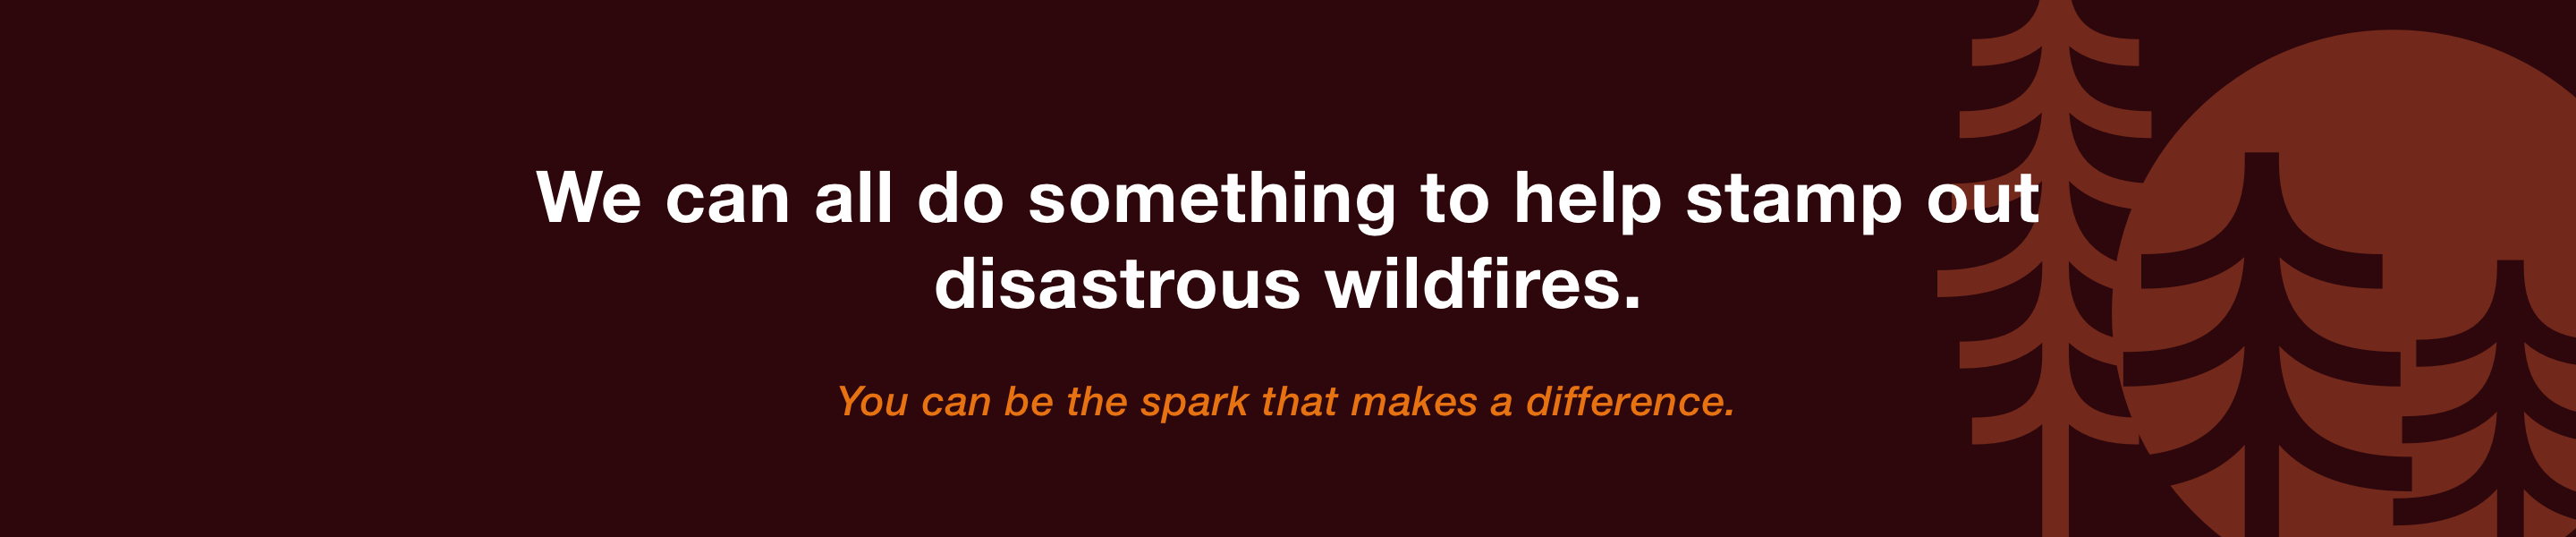 headline we can all do something to help stamp out disastrous wildfires subhead you can be the spark that makes a difference